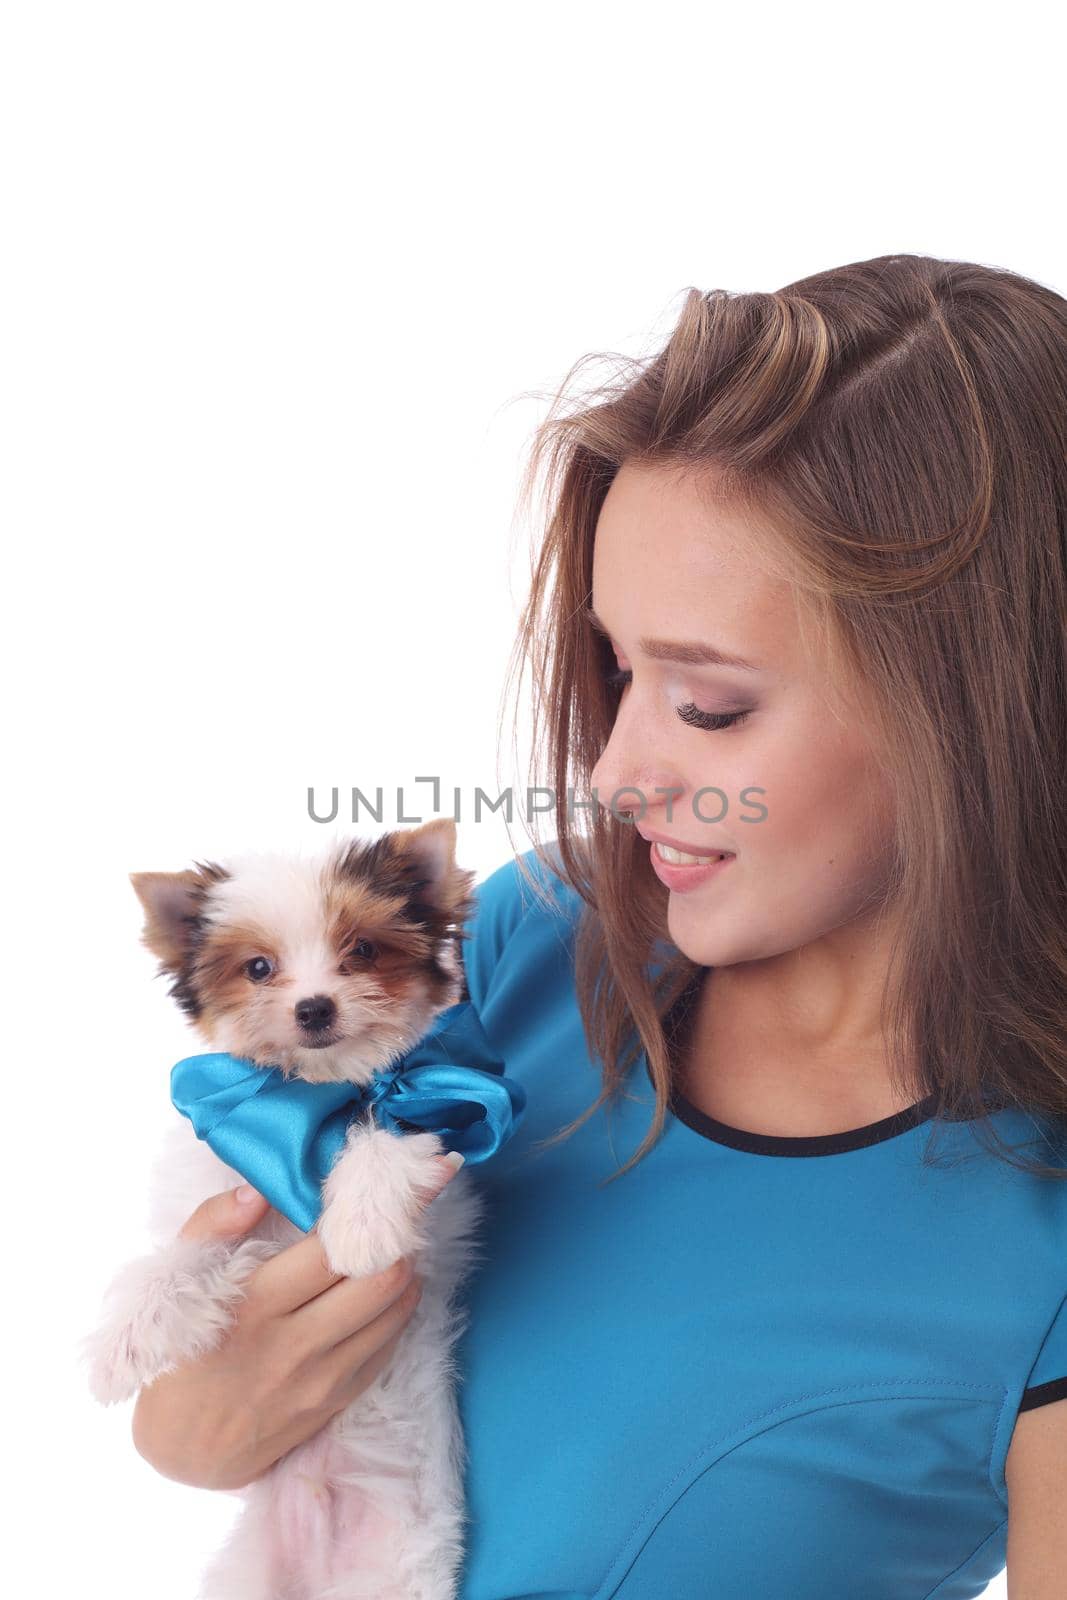 beautiful model girl wearing blue dress with the cute little beaver puppy